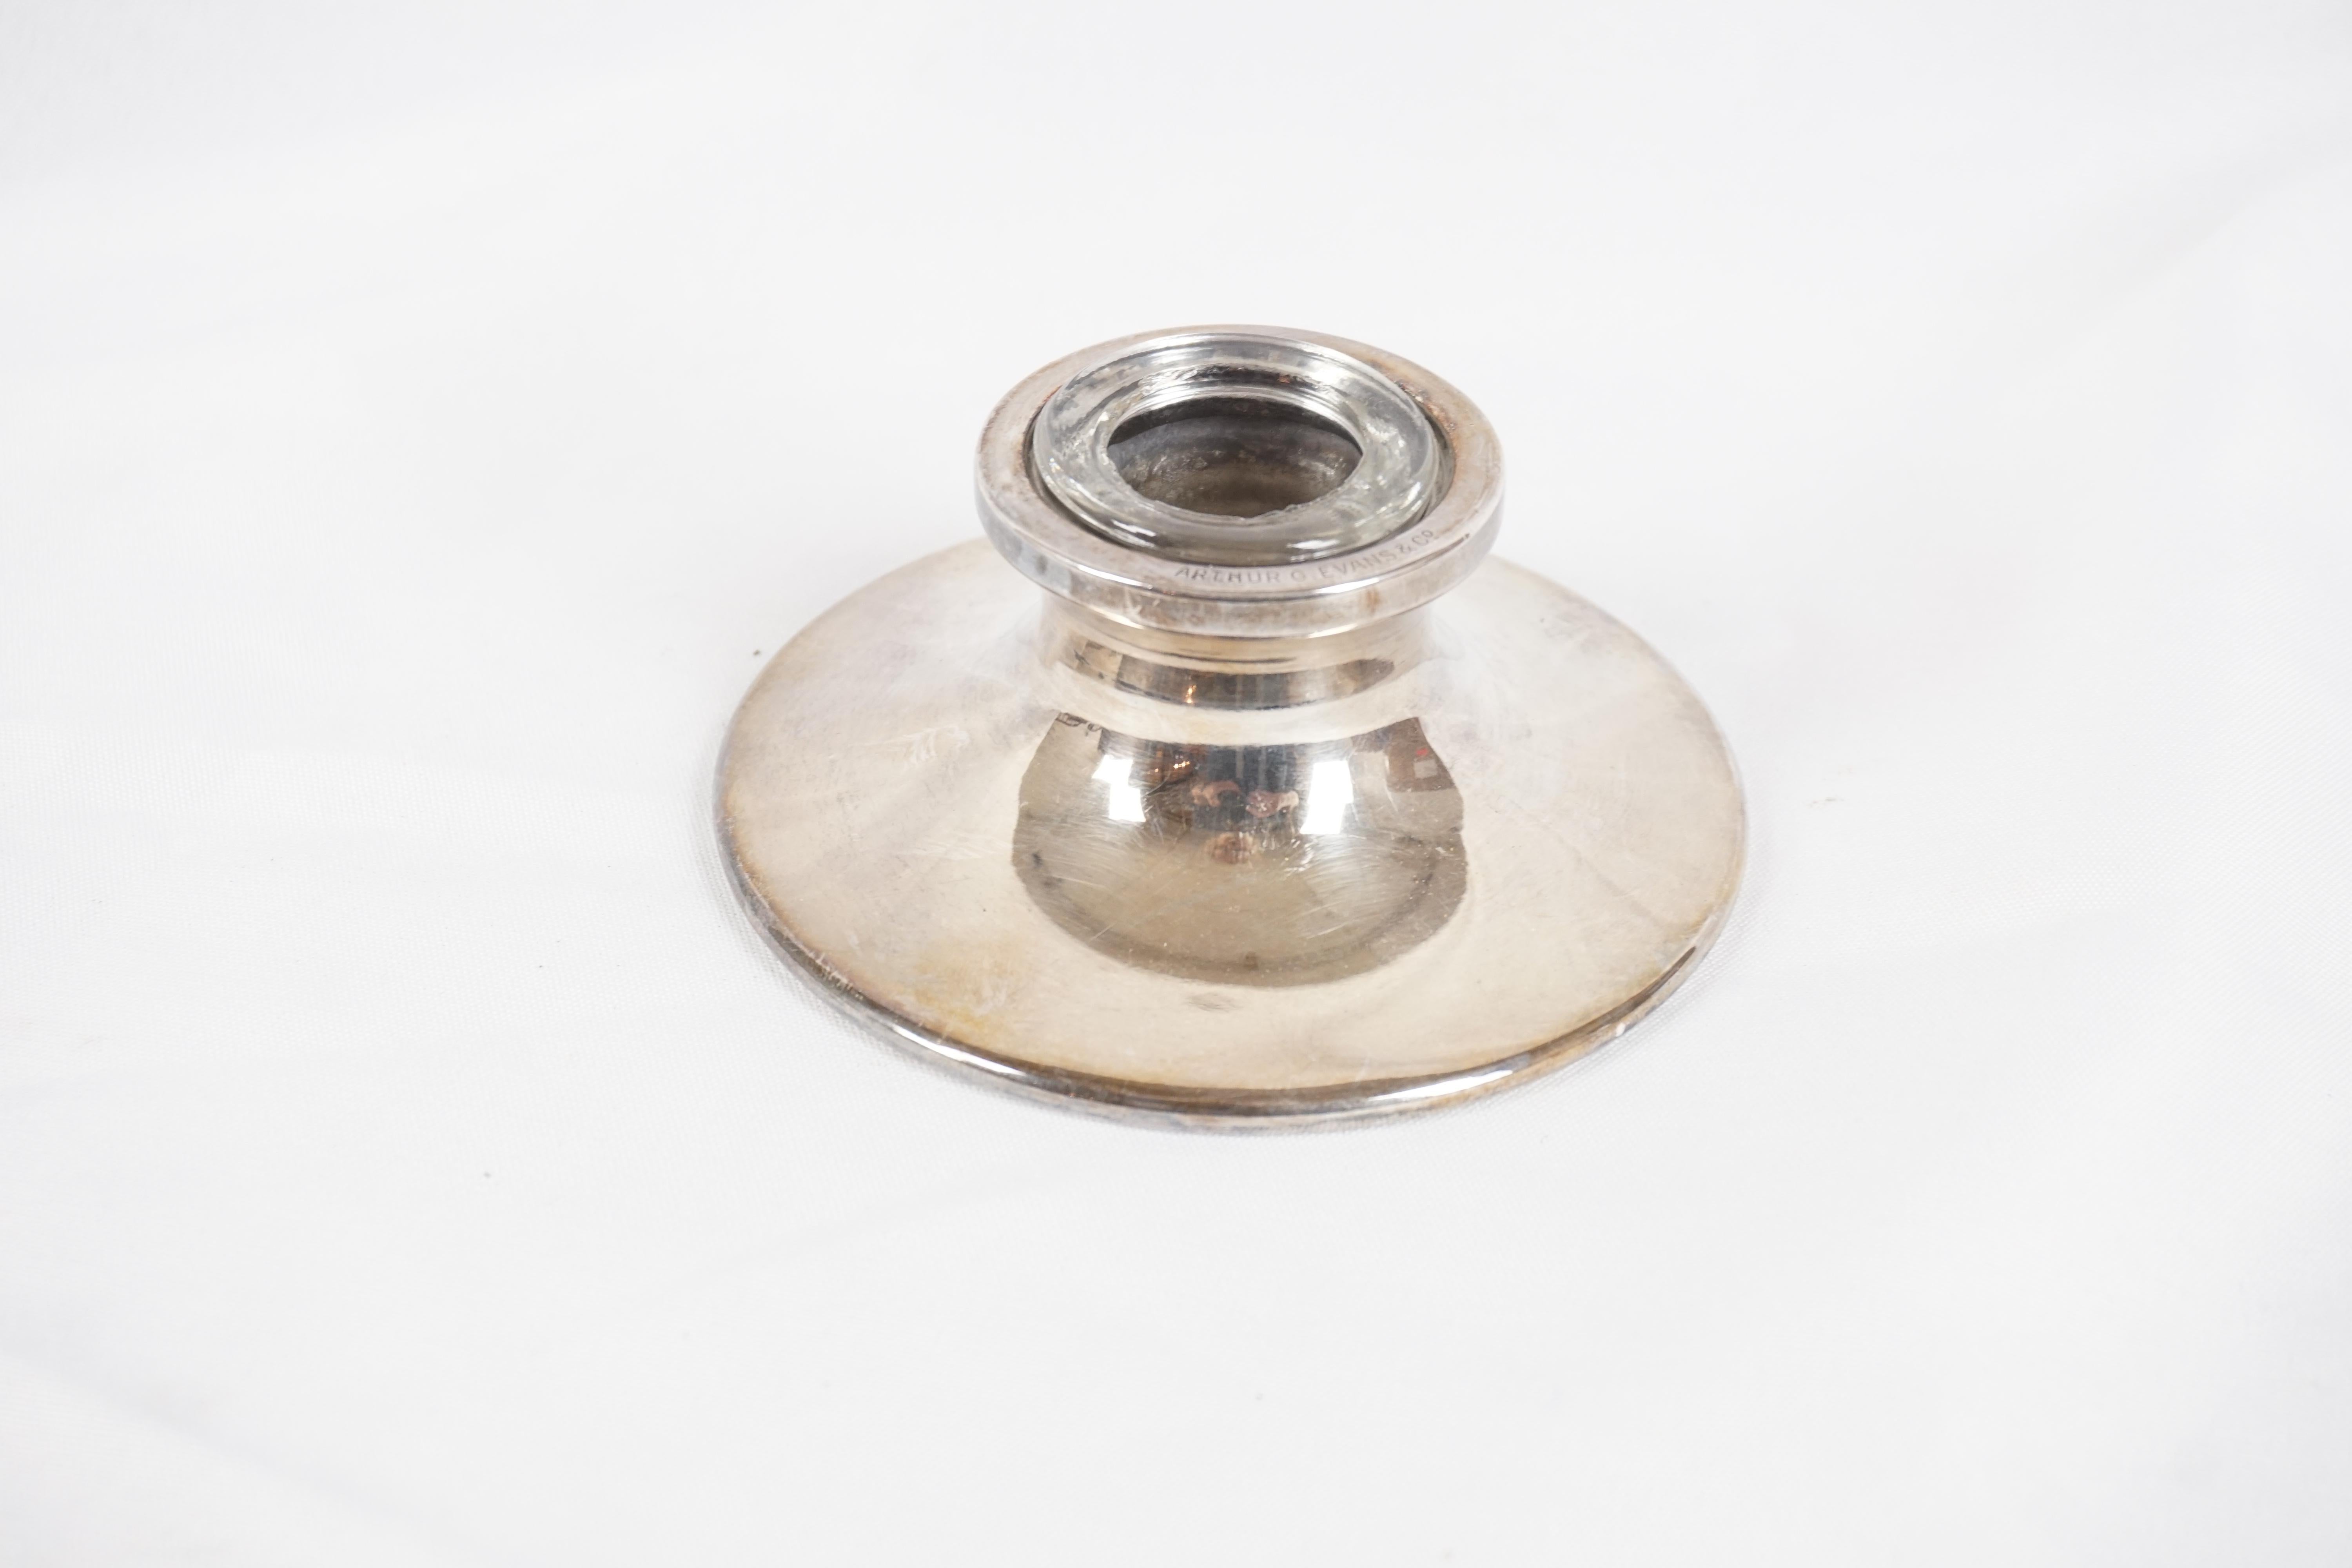 Vintage silver plated circular inkwell, Scotland 1930, H310

Scotland 1930
Circular silver plate inkwell with glass liner

Measures: 4